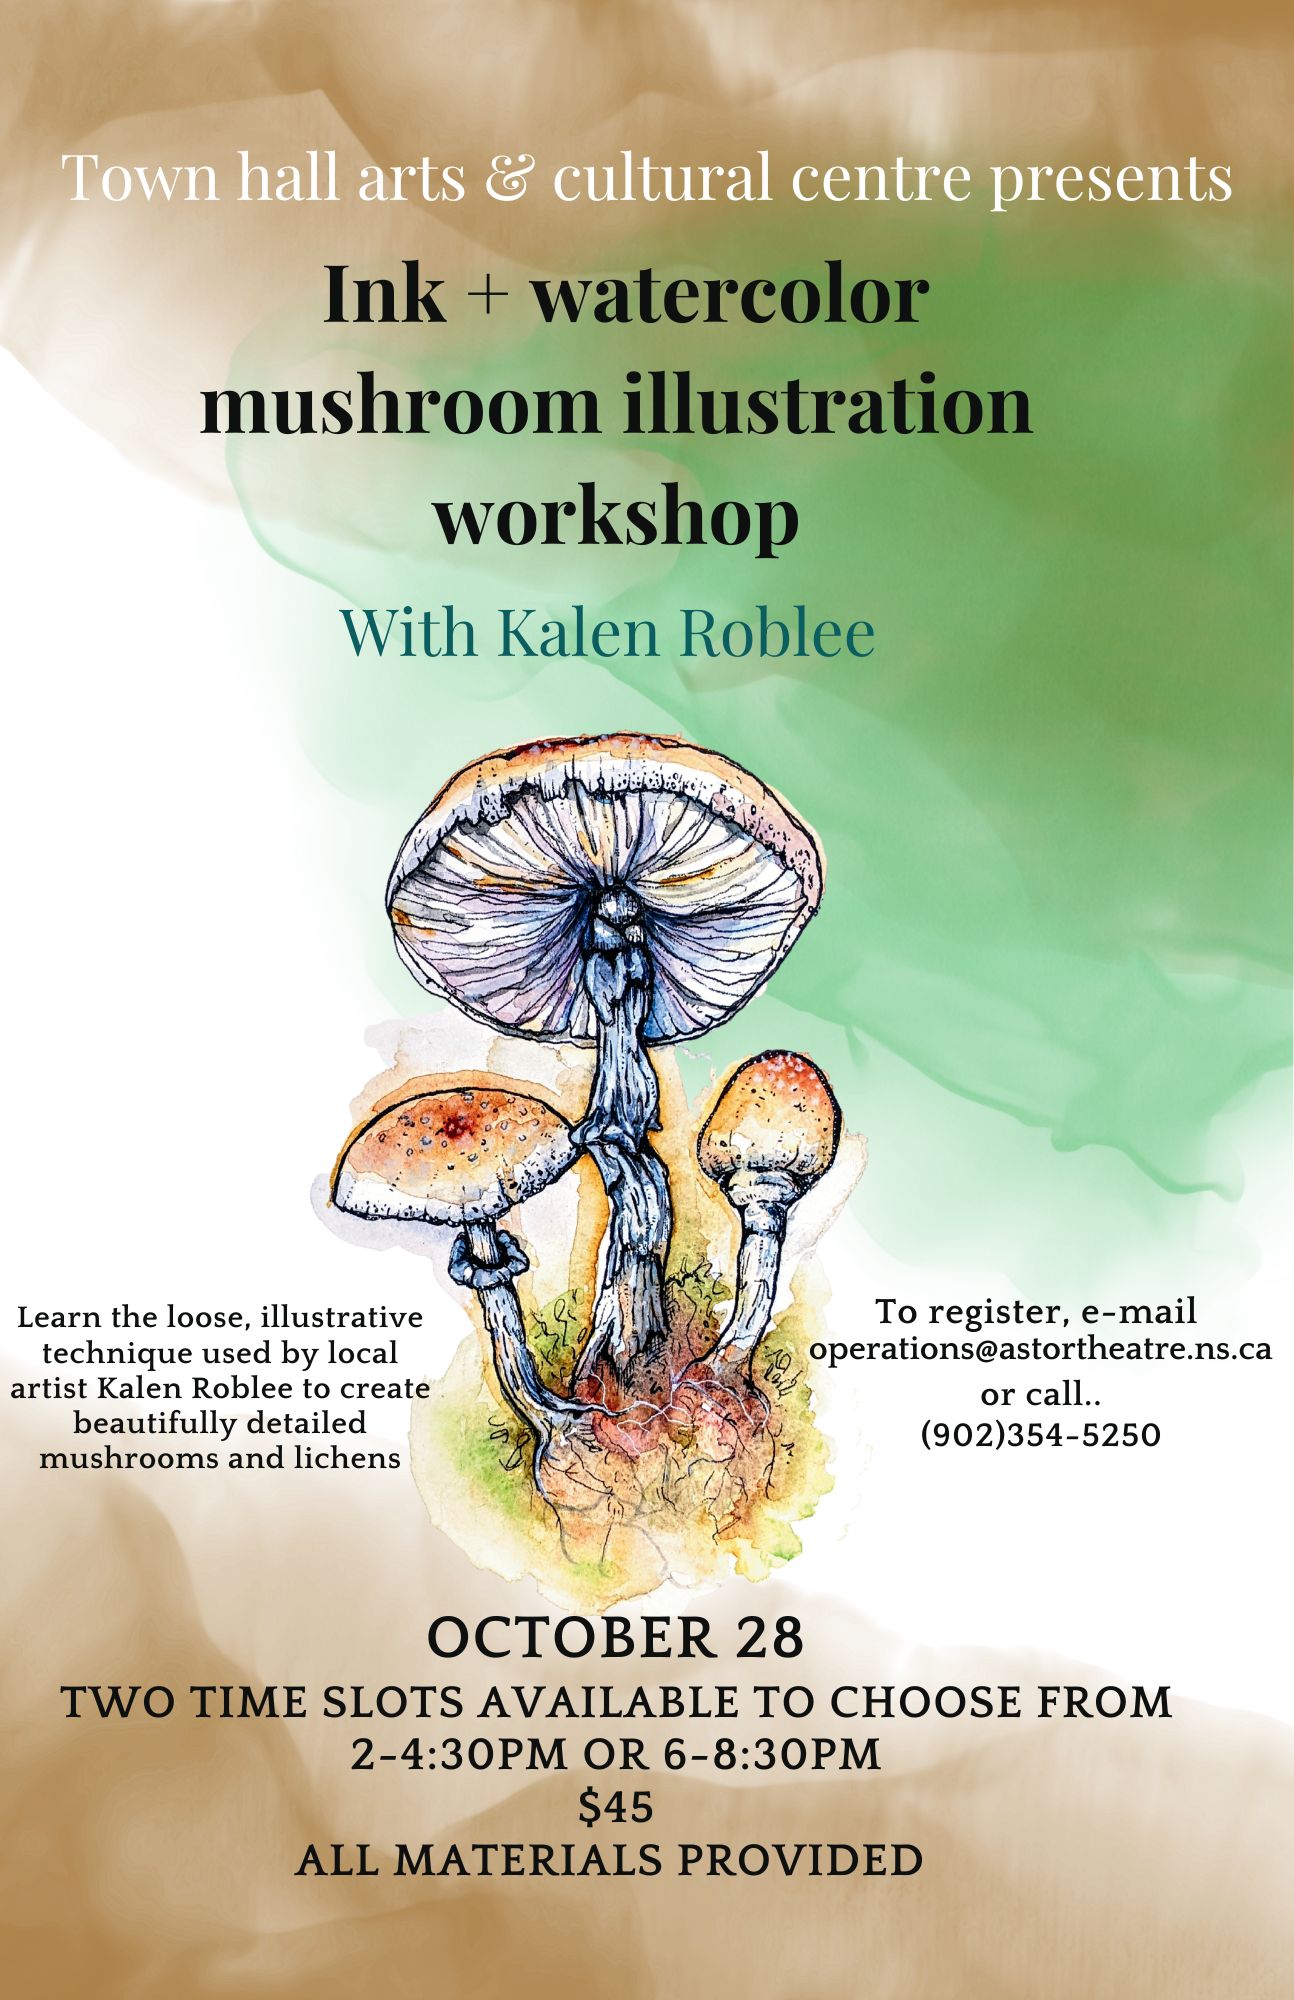 Ink + watercolour mushroom illustration workshop with Kalen Roblee @ Town Hall Arts & Cultural Centre